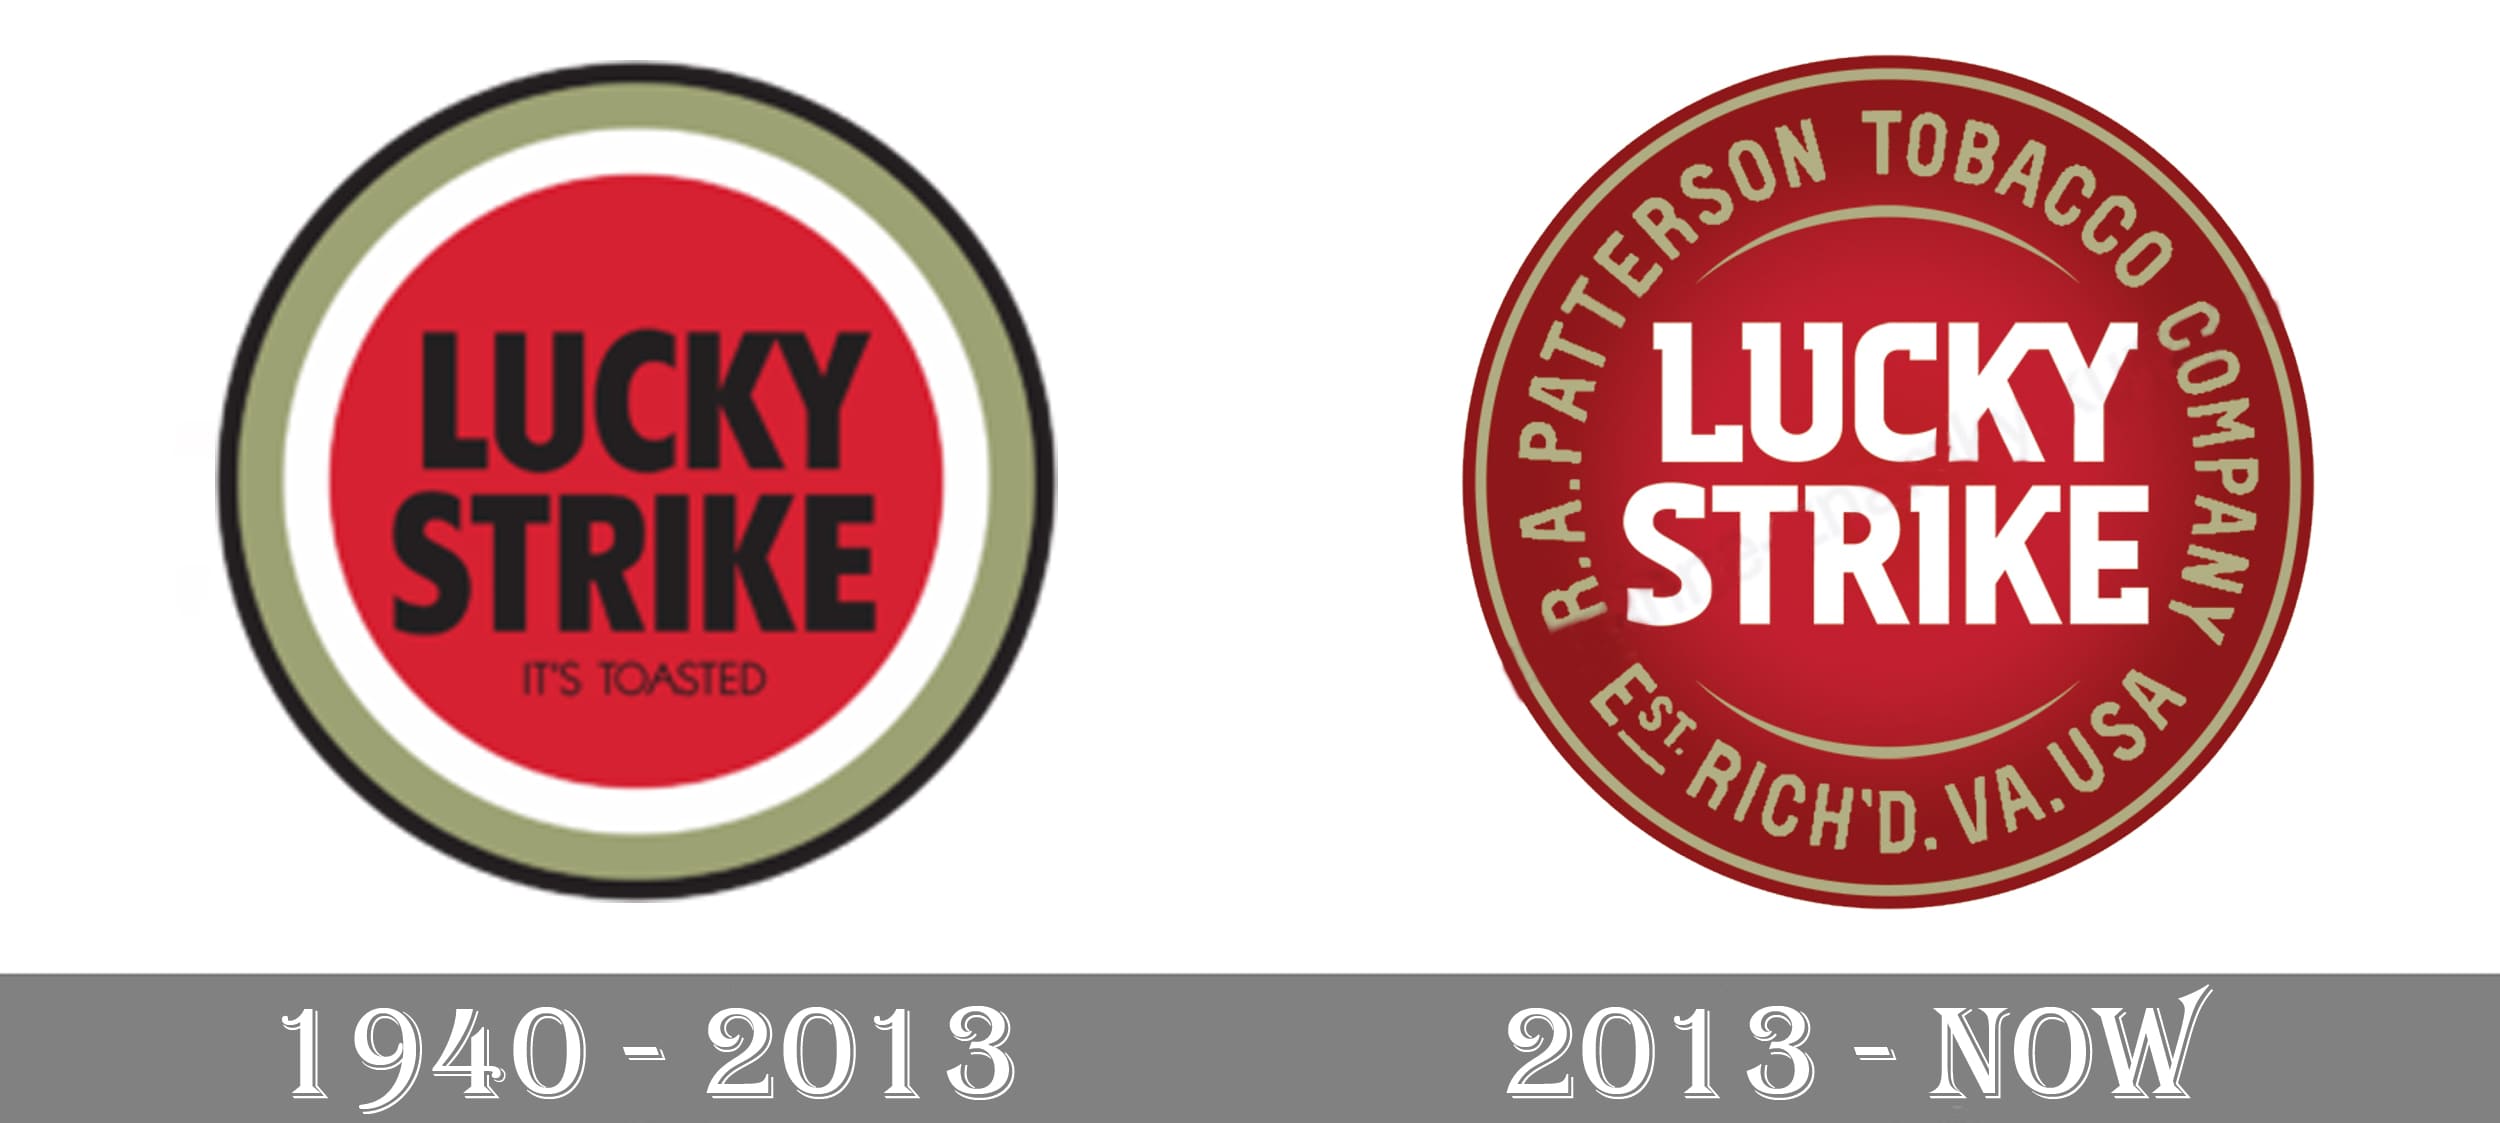 lucky-strike-logo-and-symbol-meaning-history-png